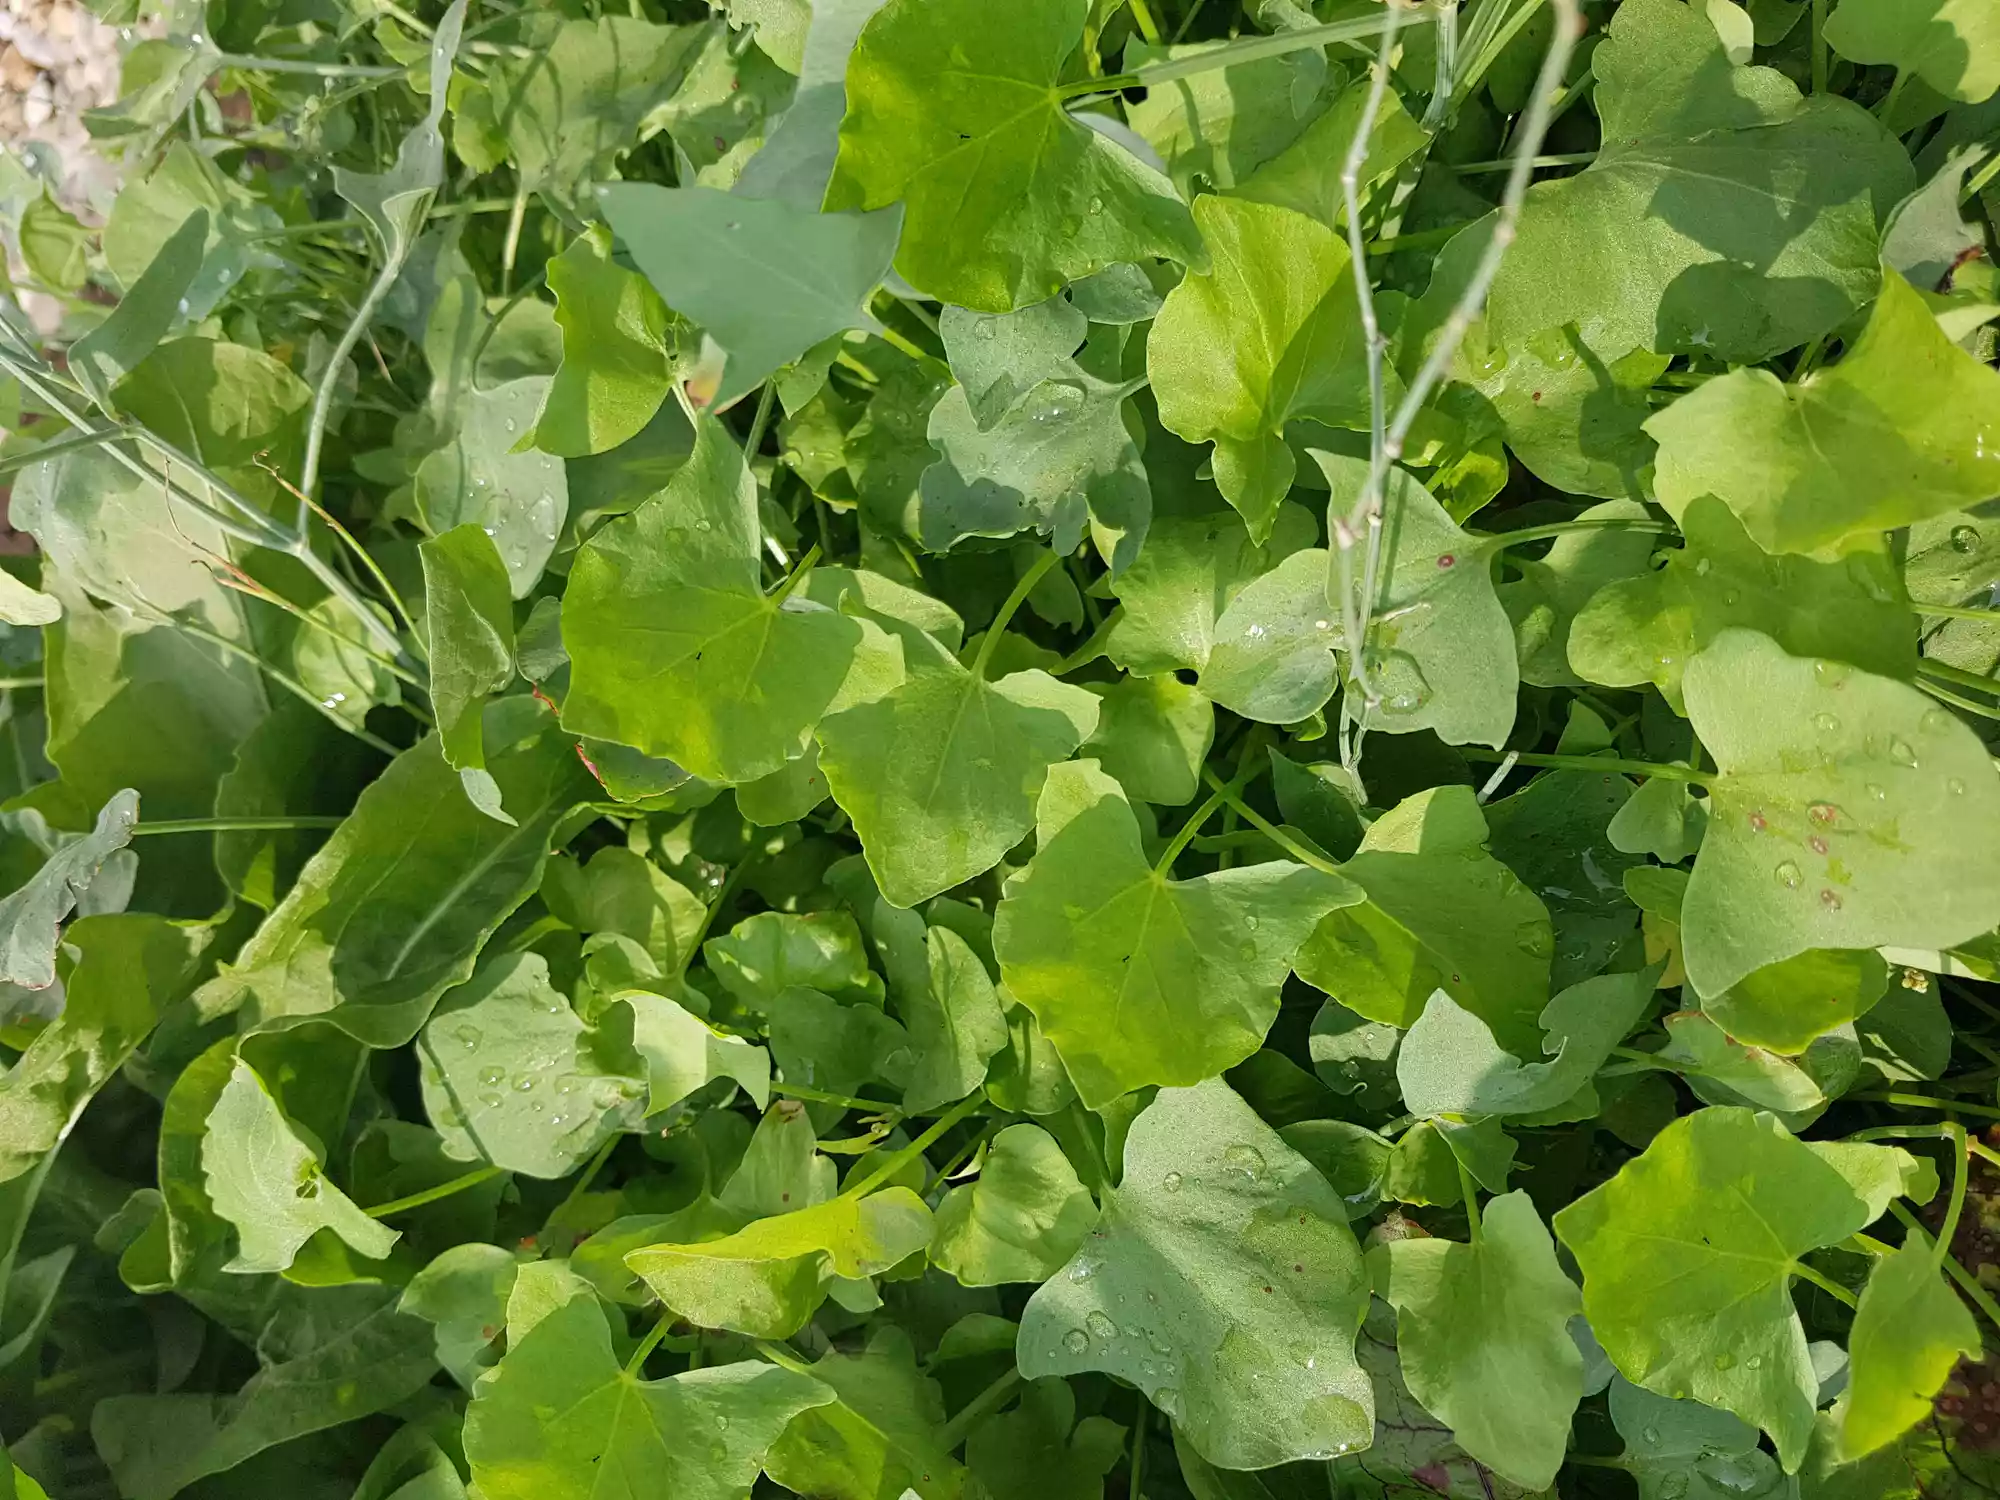 A patch of green sorrel leaves in a garden